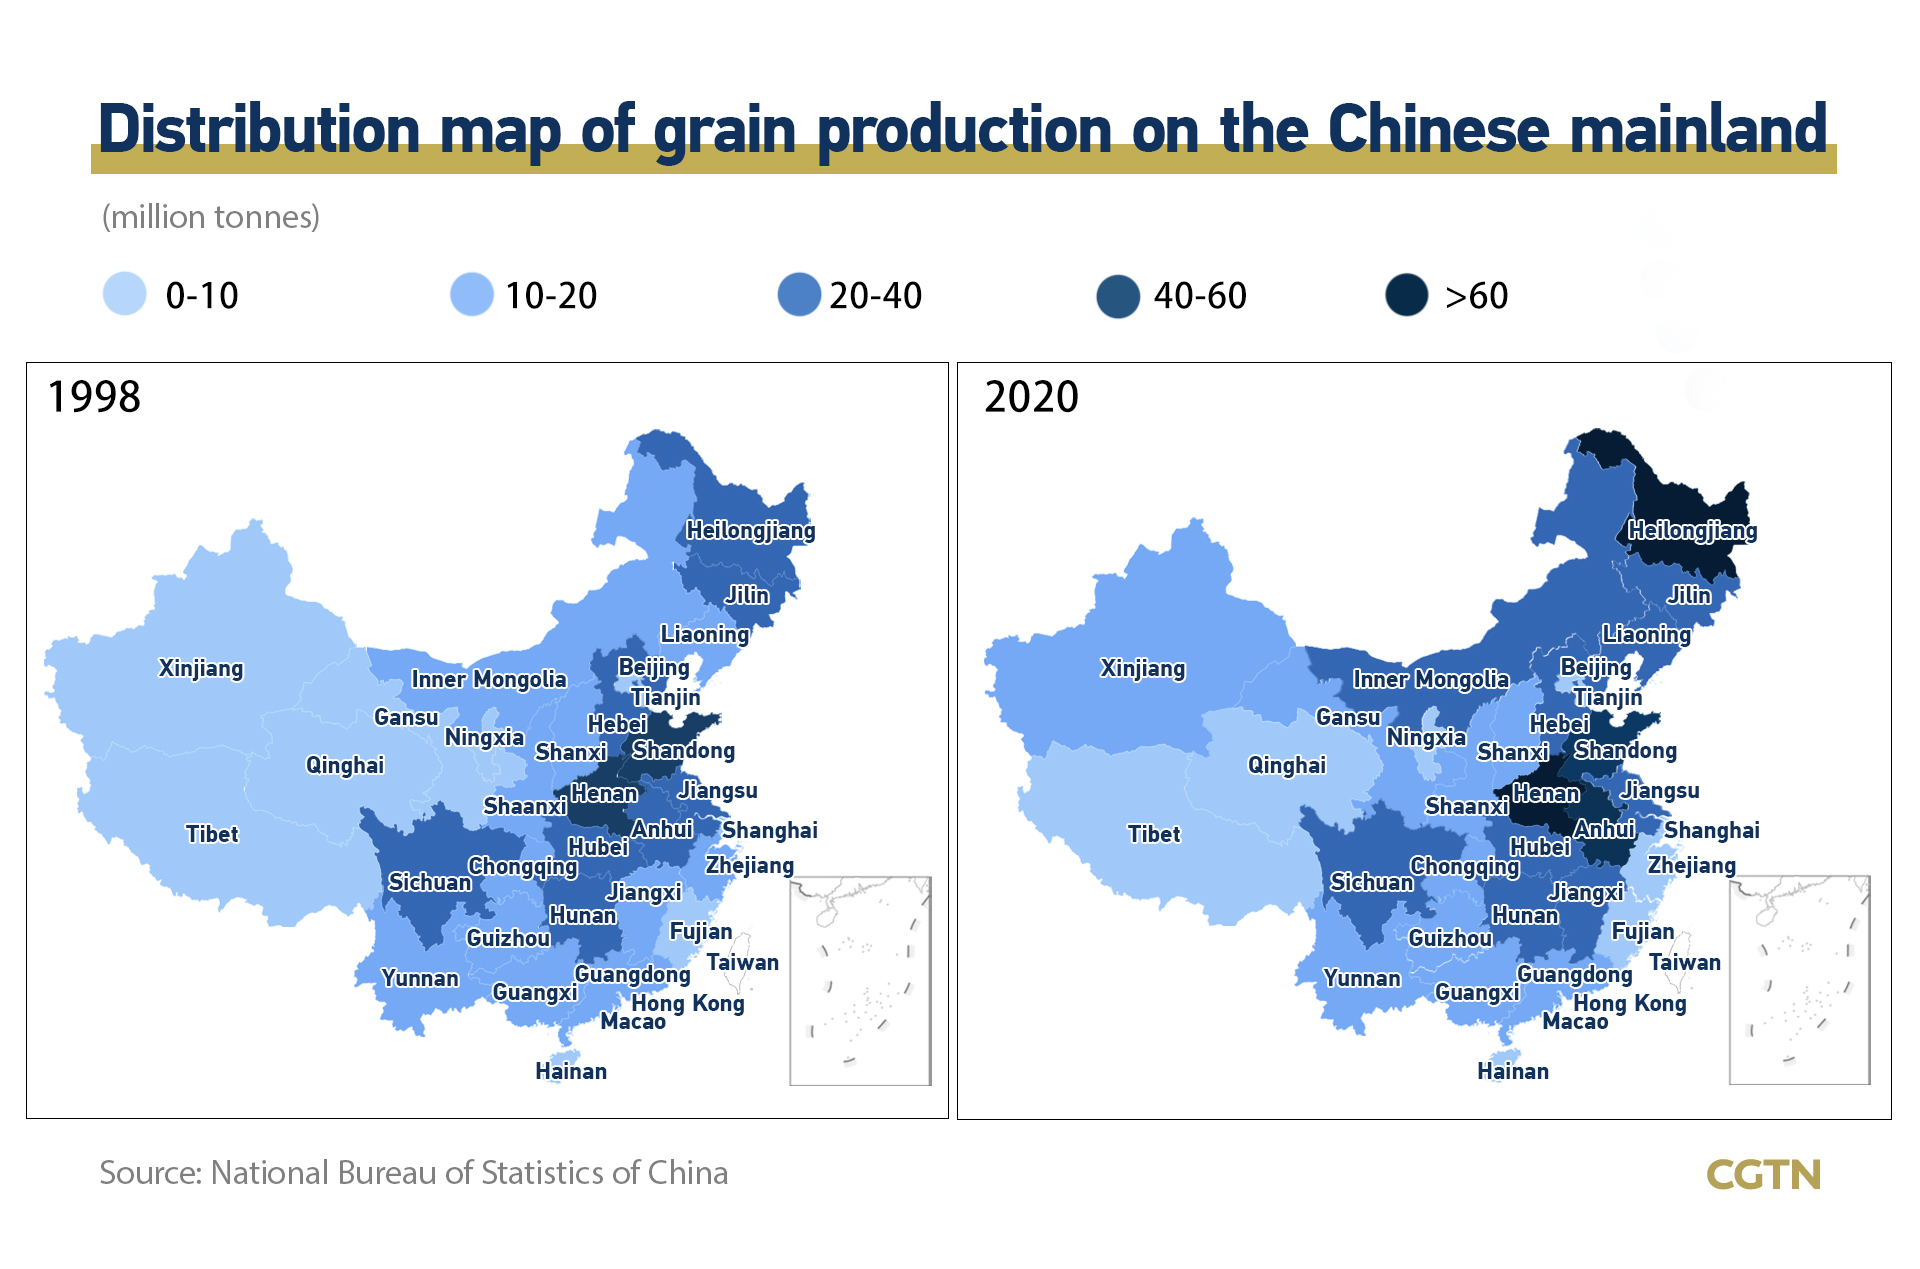 Graphics: Where is China's largest granary?